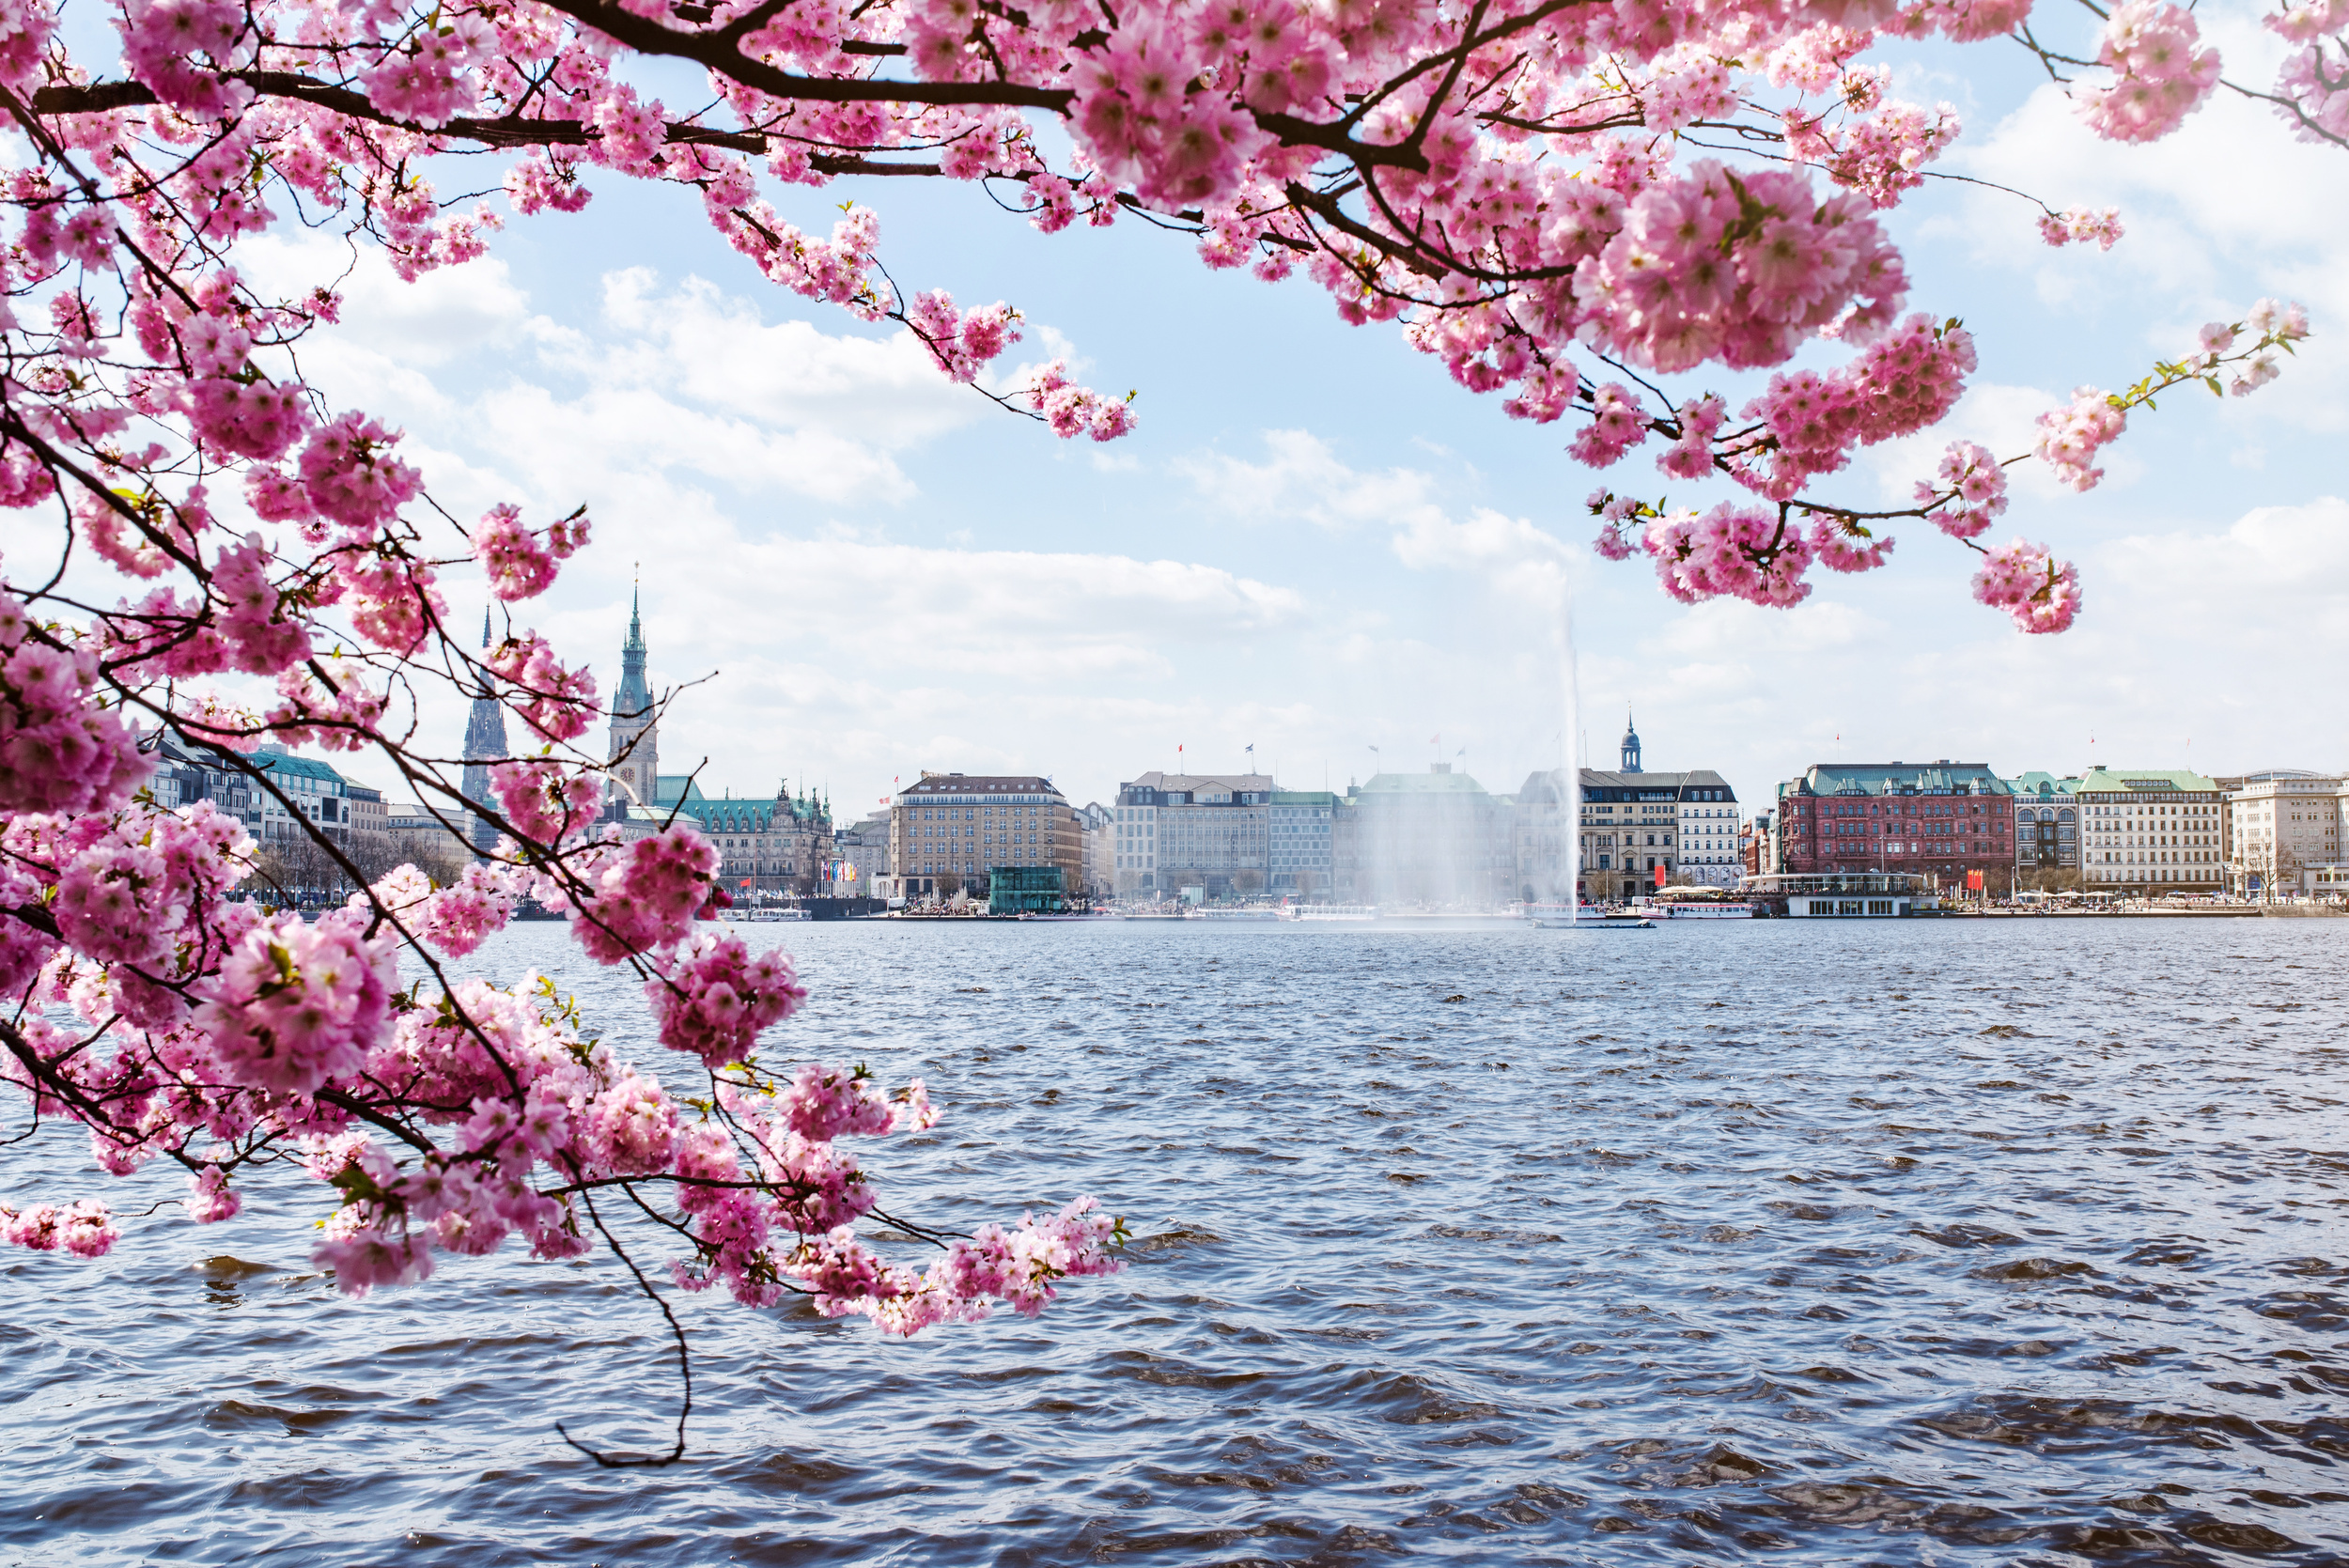 <p>Hamburg is a cute, if unassuming, German town. But it really stuns during the spring when the cherry blossom festival occurs.</p><p><a href='https://www.msn.com/en-us/community/channel/vid-cj9pqbr0vn9in2b6ddcd8sfgpfq6x6utp44fssrv6mc2gtybw0us'>Follow us on MSN to see more of our exclusive lifestyle content.</a></p>